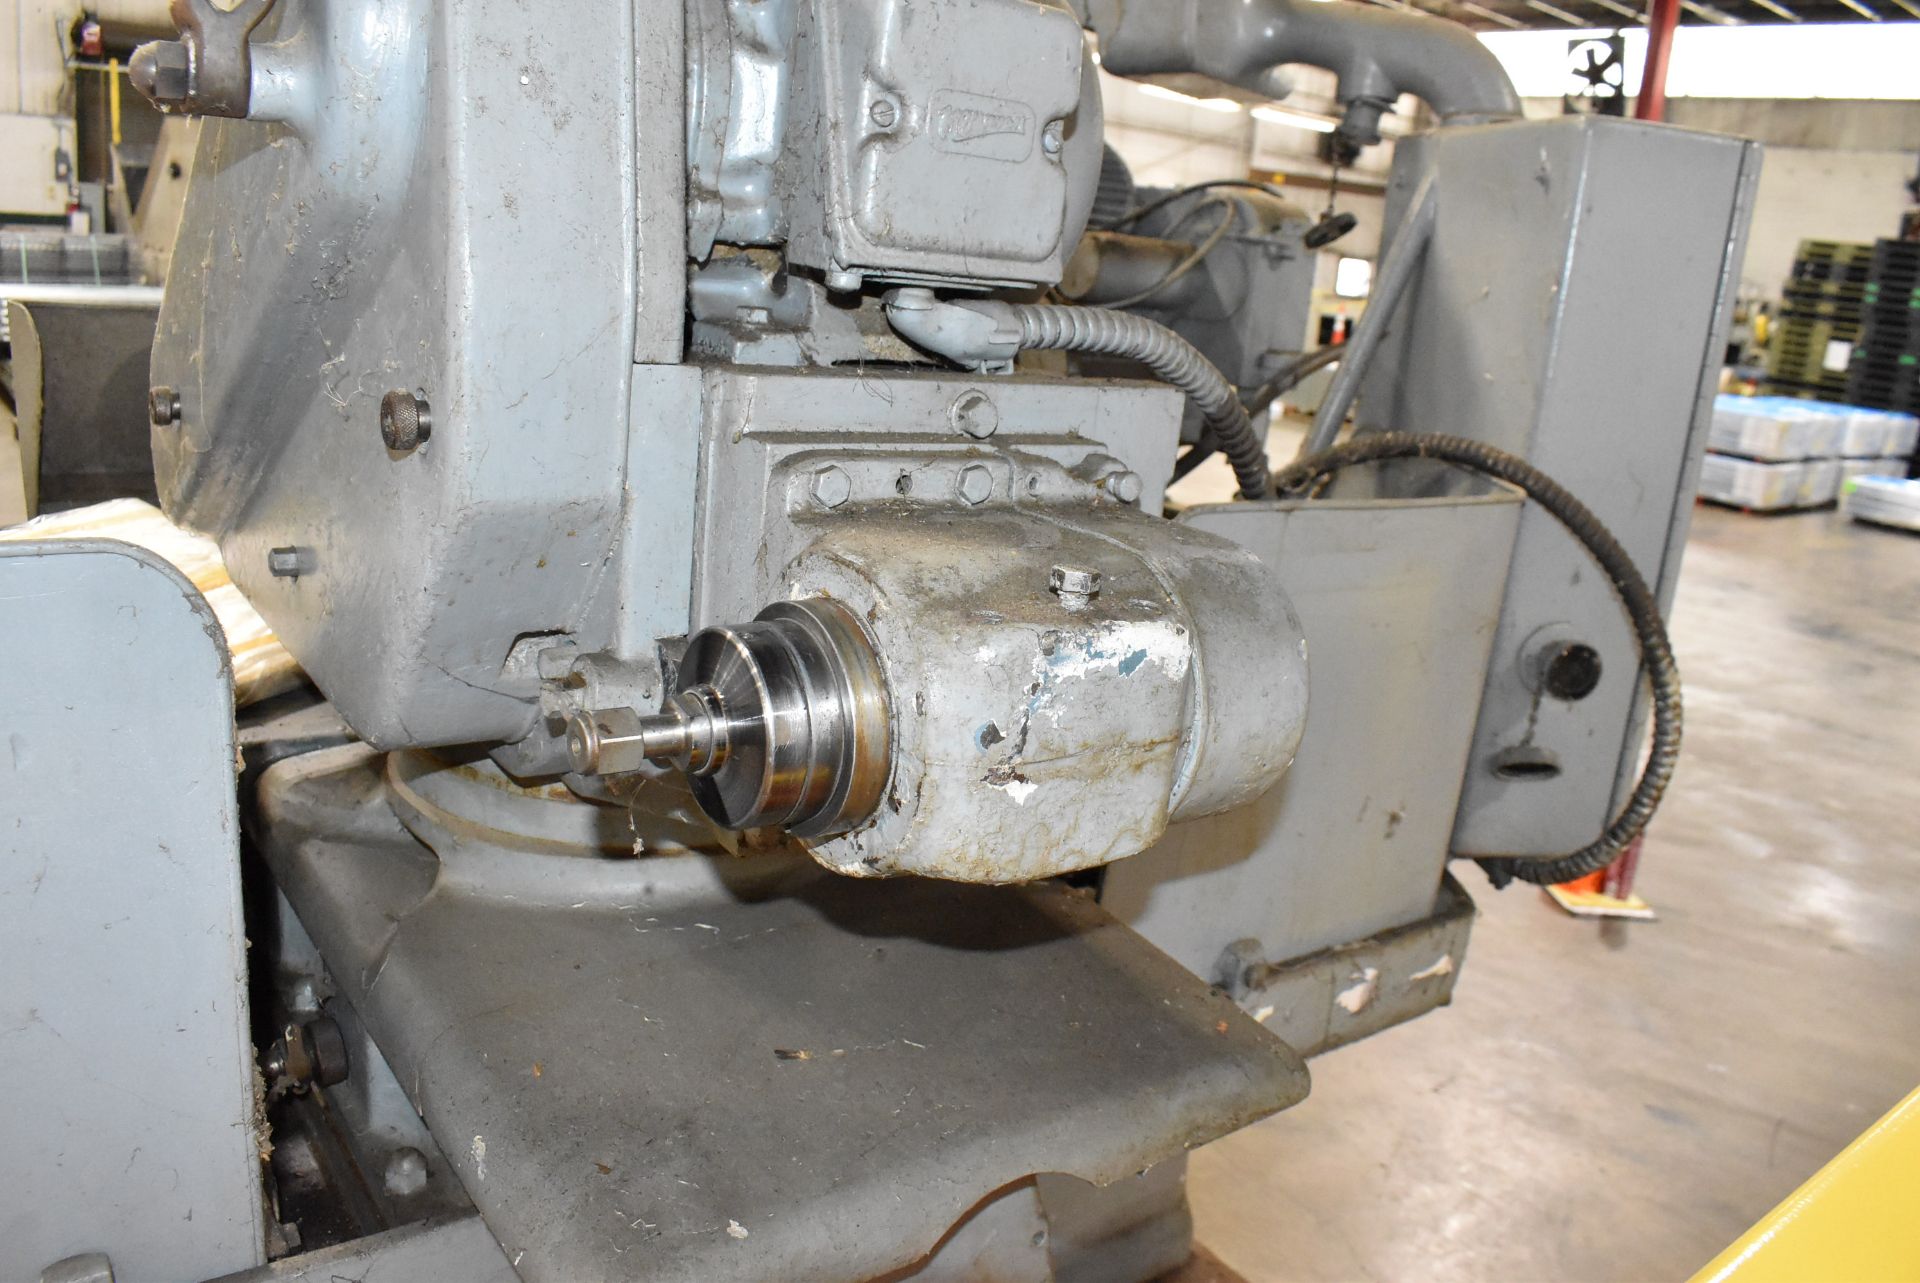 JONES SHIPMAN UNIVERSAL CYLINDRICAL AND INTERNAL GRINDER WITH 10" 4 JAW CHUCK, MAIN SPINDLE SPEEDS - Image 8 of 15